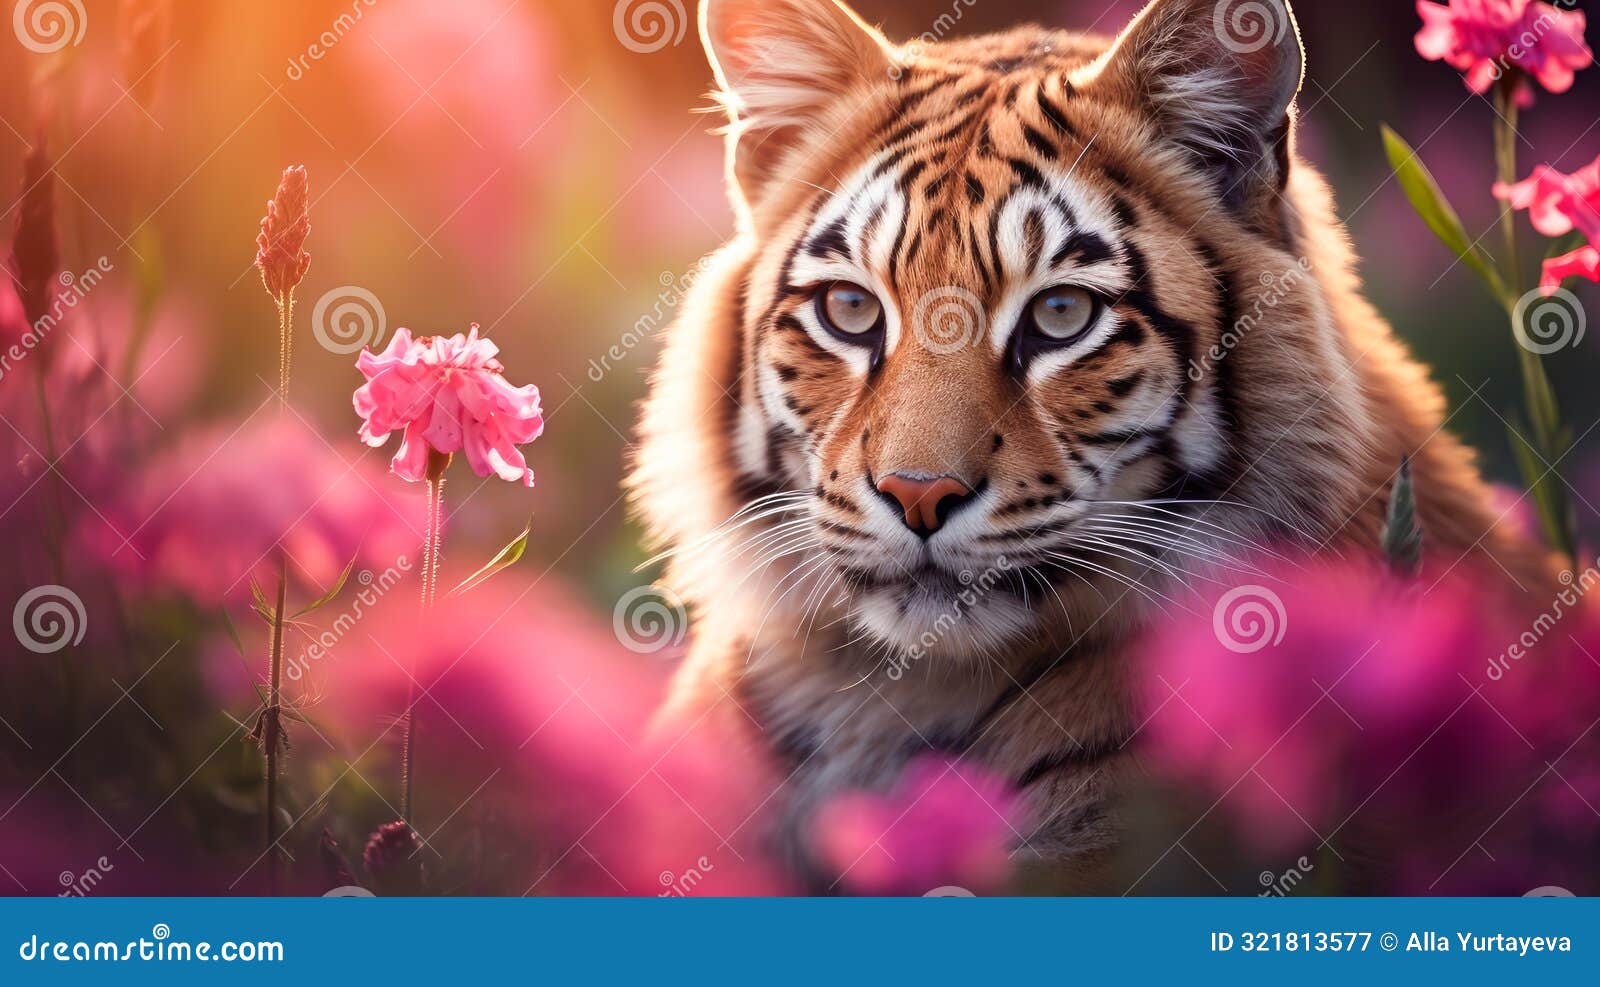 cute, beautiful tiger in a field with flowers in nature, in sunny pink rays.